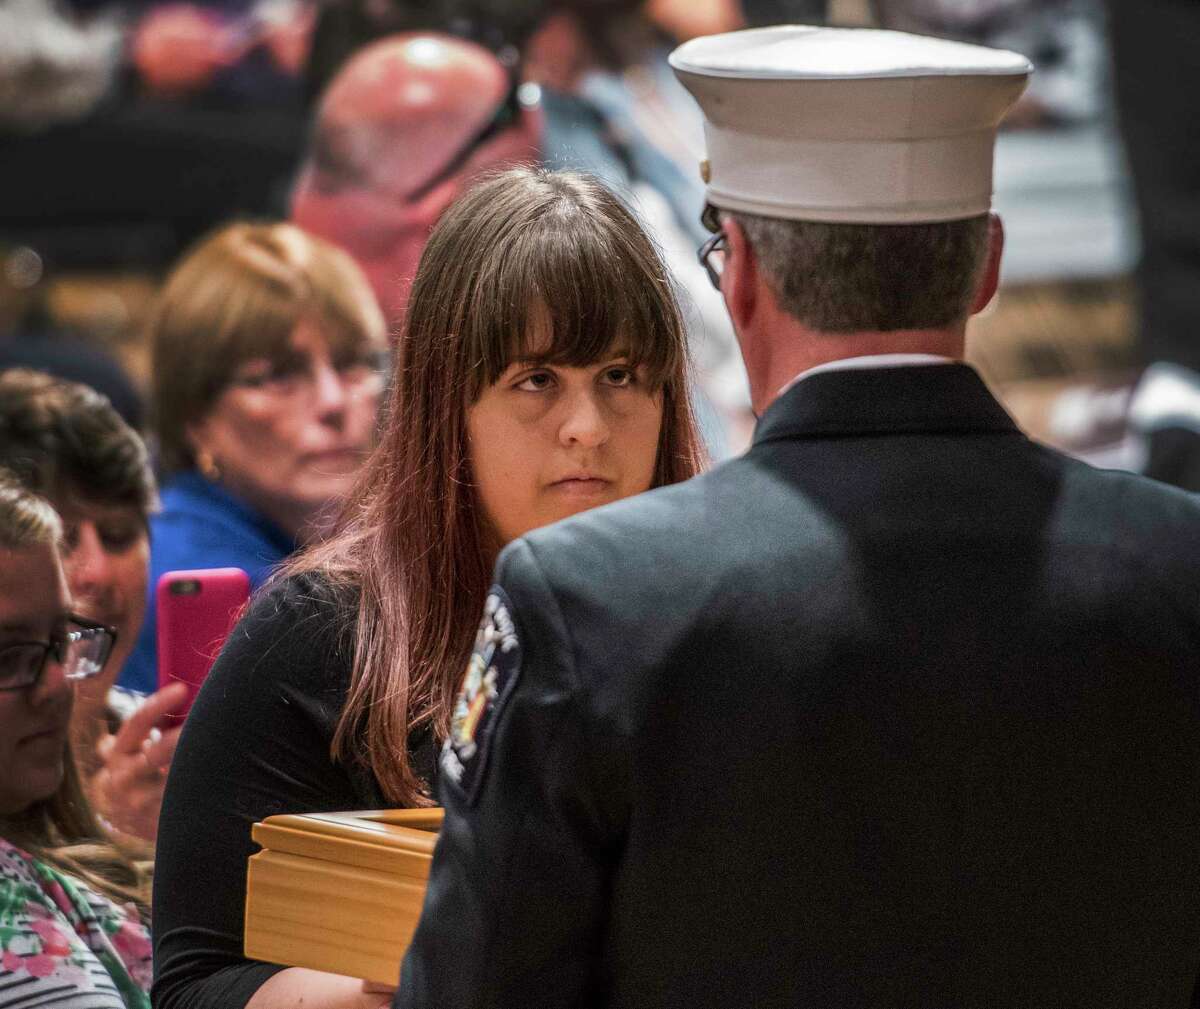 Andria Capobianco accepts a New York State Flag from William R. Davis Jr., deputy state fire administrator on behalf of her deceased father NYFD firefighter Carl Capobianco during the 20th Annual New York State Fallen Firefighters Memorial ceremony at the Convention Center at the Empire State Plaza on Tuesday, Oct. 10, 2017, in Albany, N.Y. (Skip Dickstein/Times Union)